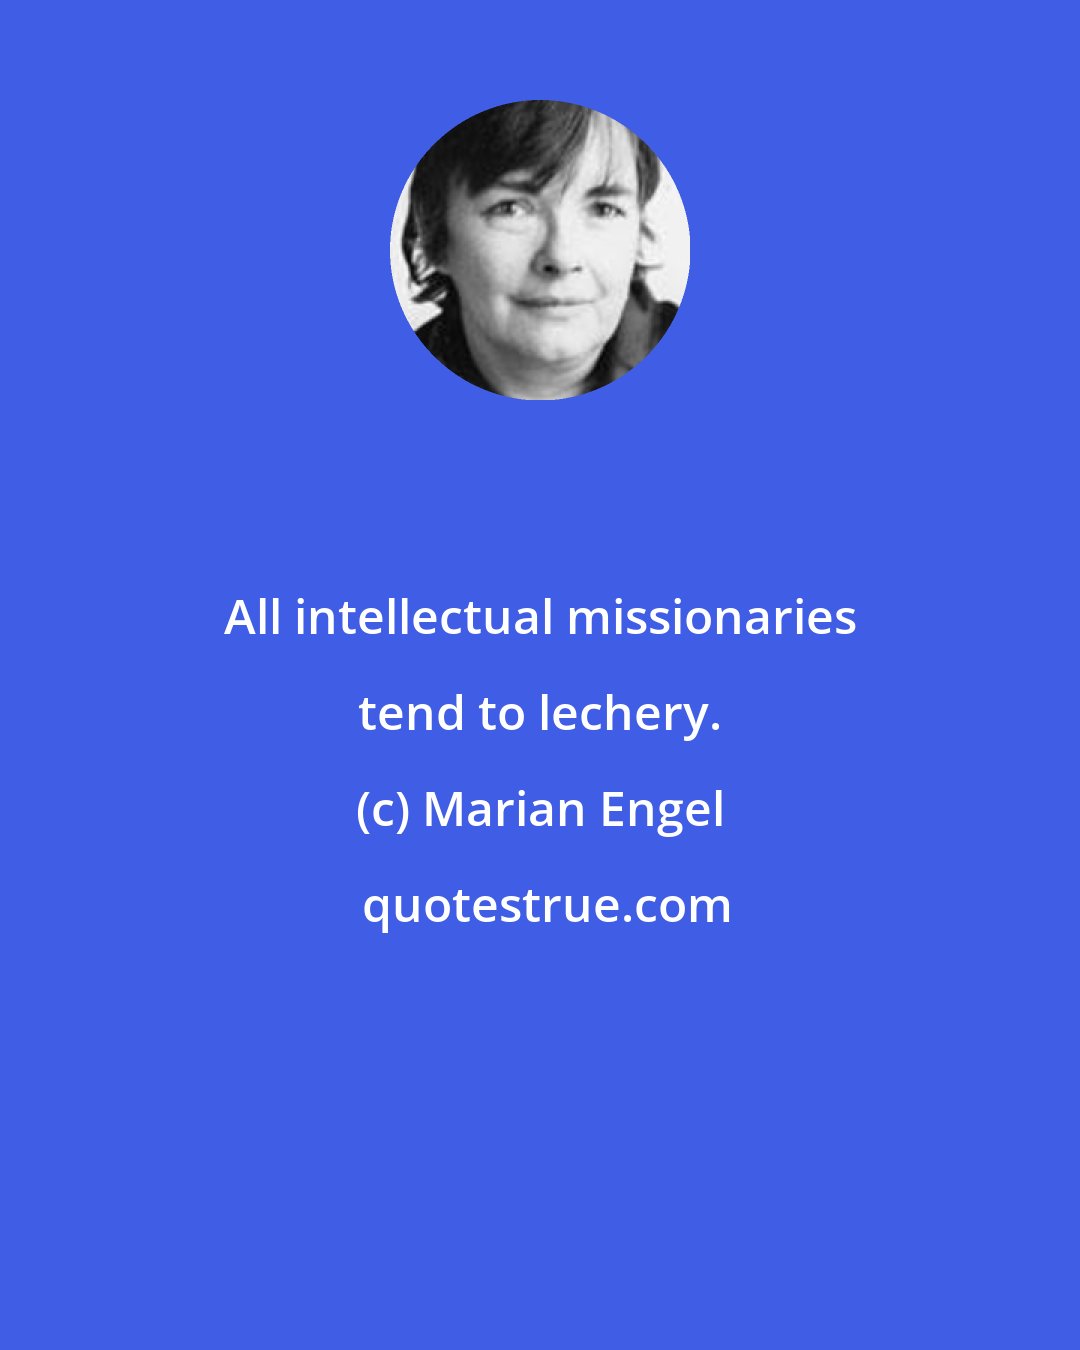 Marian Engel: All intellectual missionaries tend to lechery.